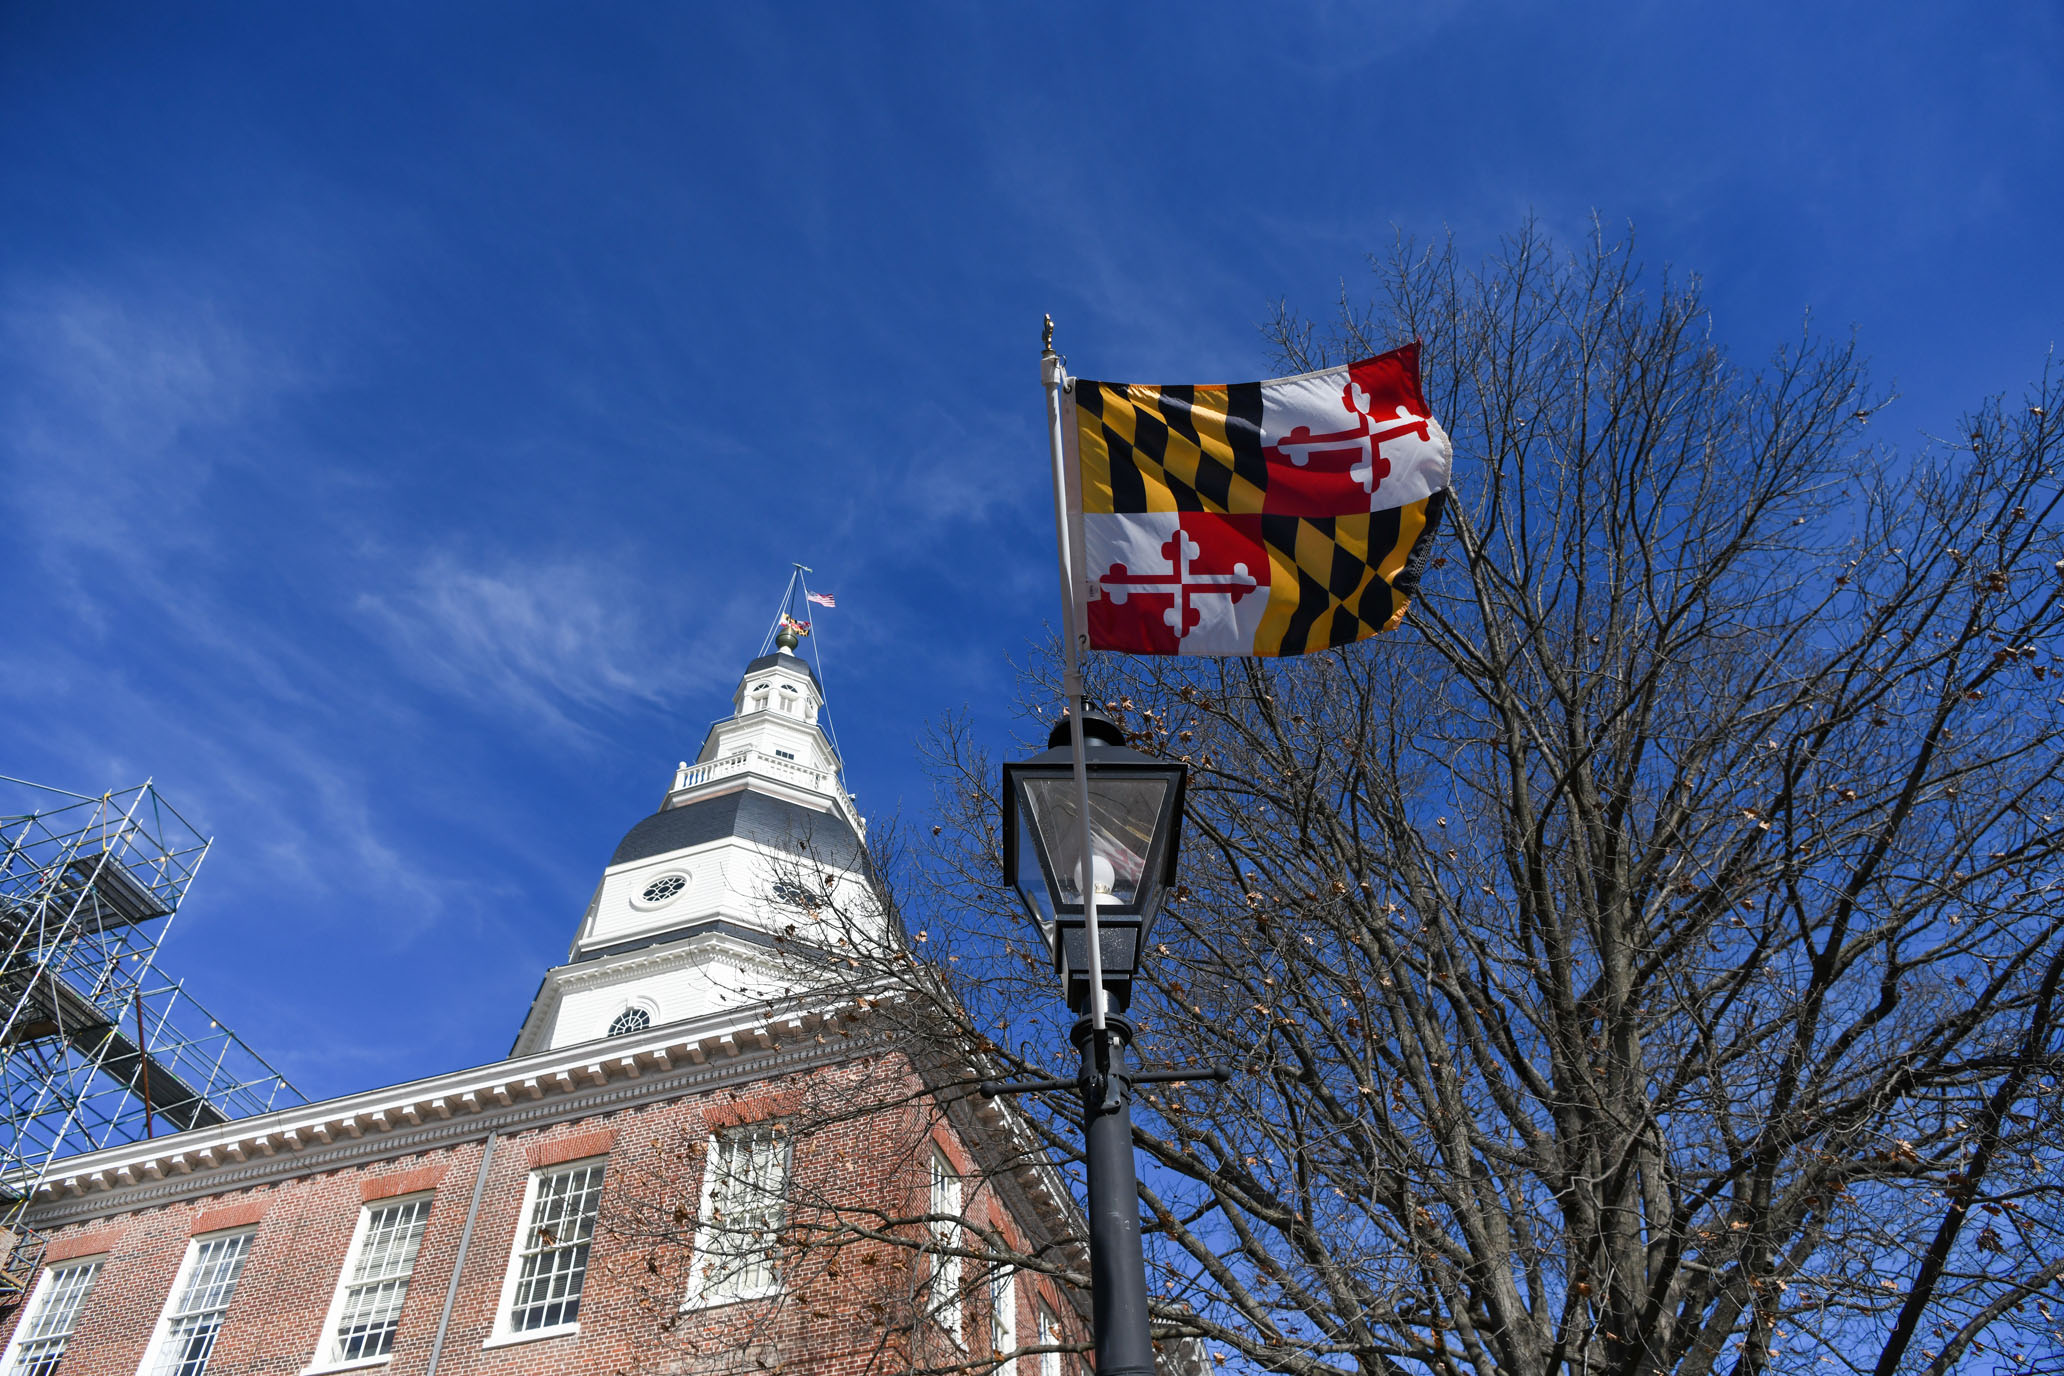 The state of Maryland flag flying in downtown Annapolis, Maryland's state capital.